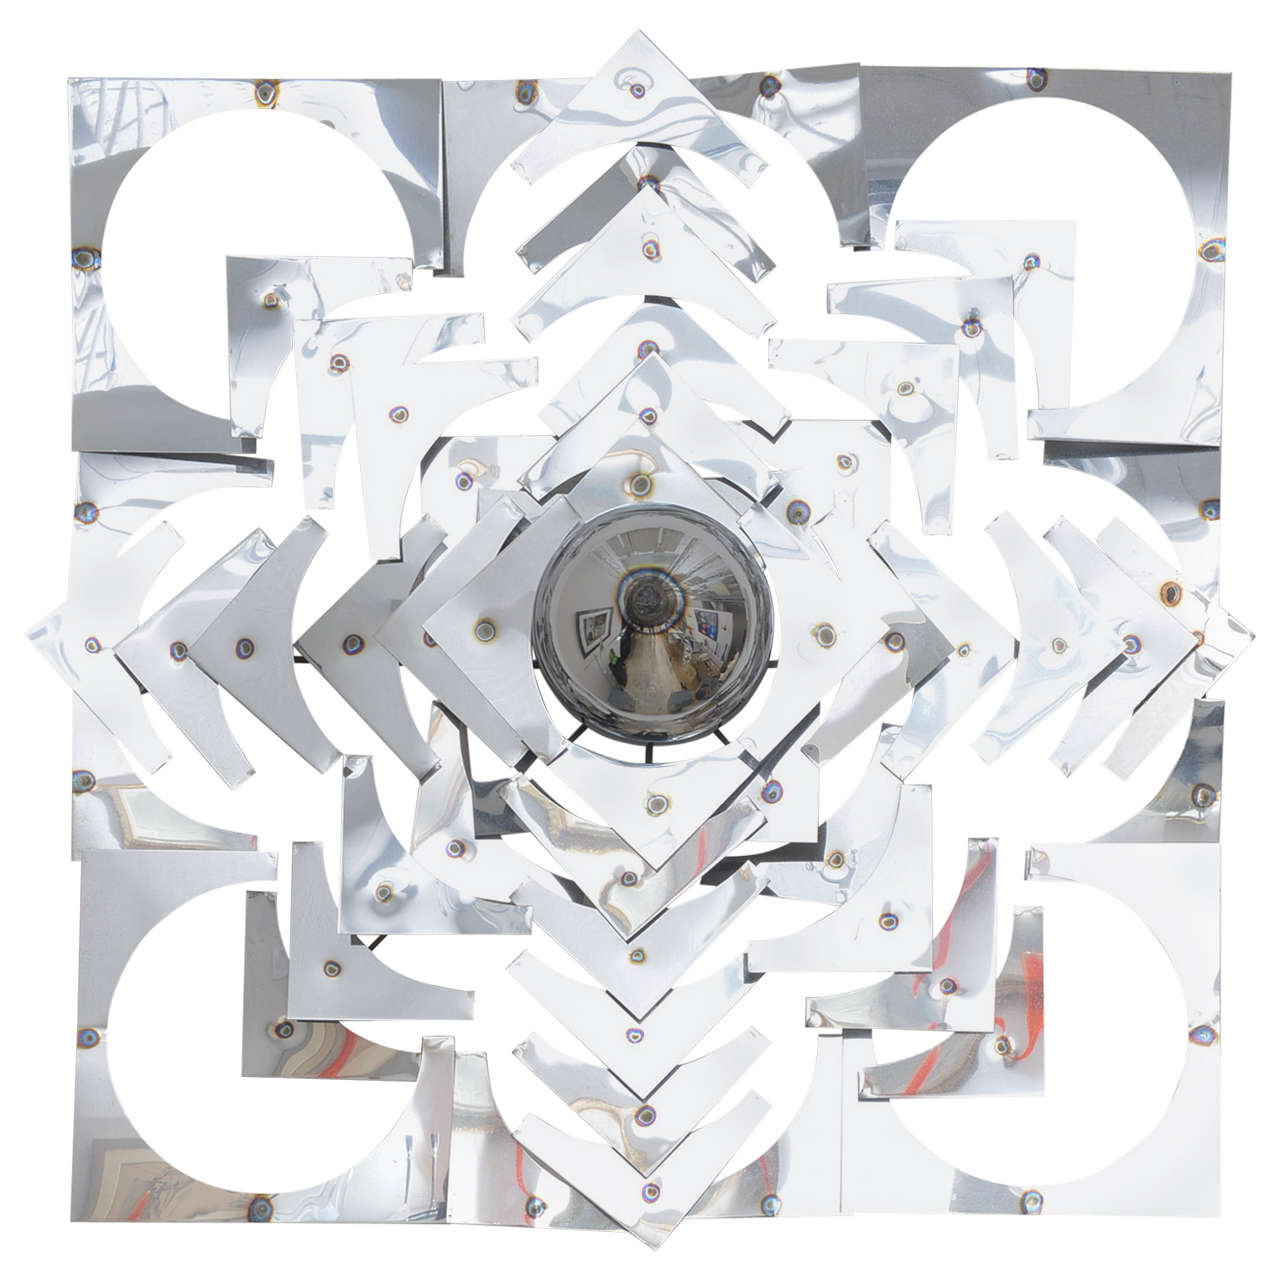 This large-scale wall sculpture was created in the 1970s and is very much a take on the kaleidoscope with its geometric shapes and forms in a stylized pattern.  The use of polished chrome gives the piece great deal of movement as the light plays